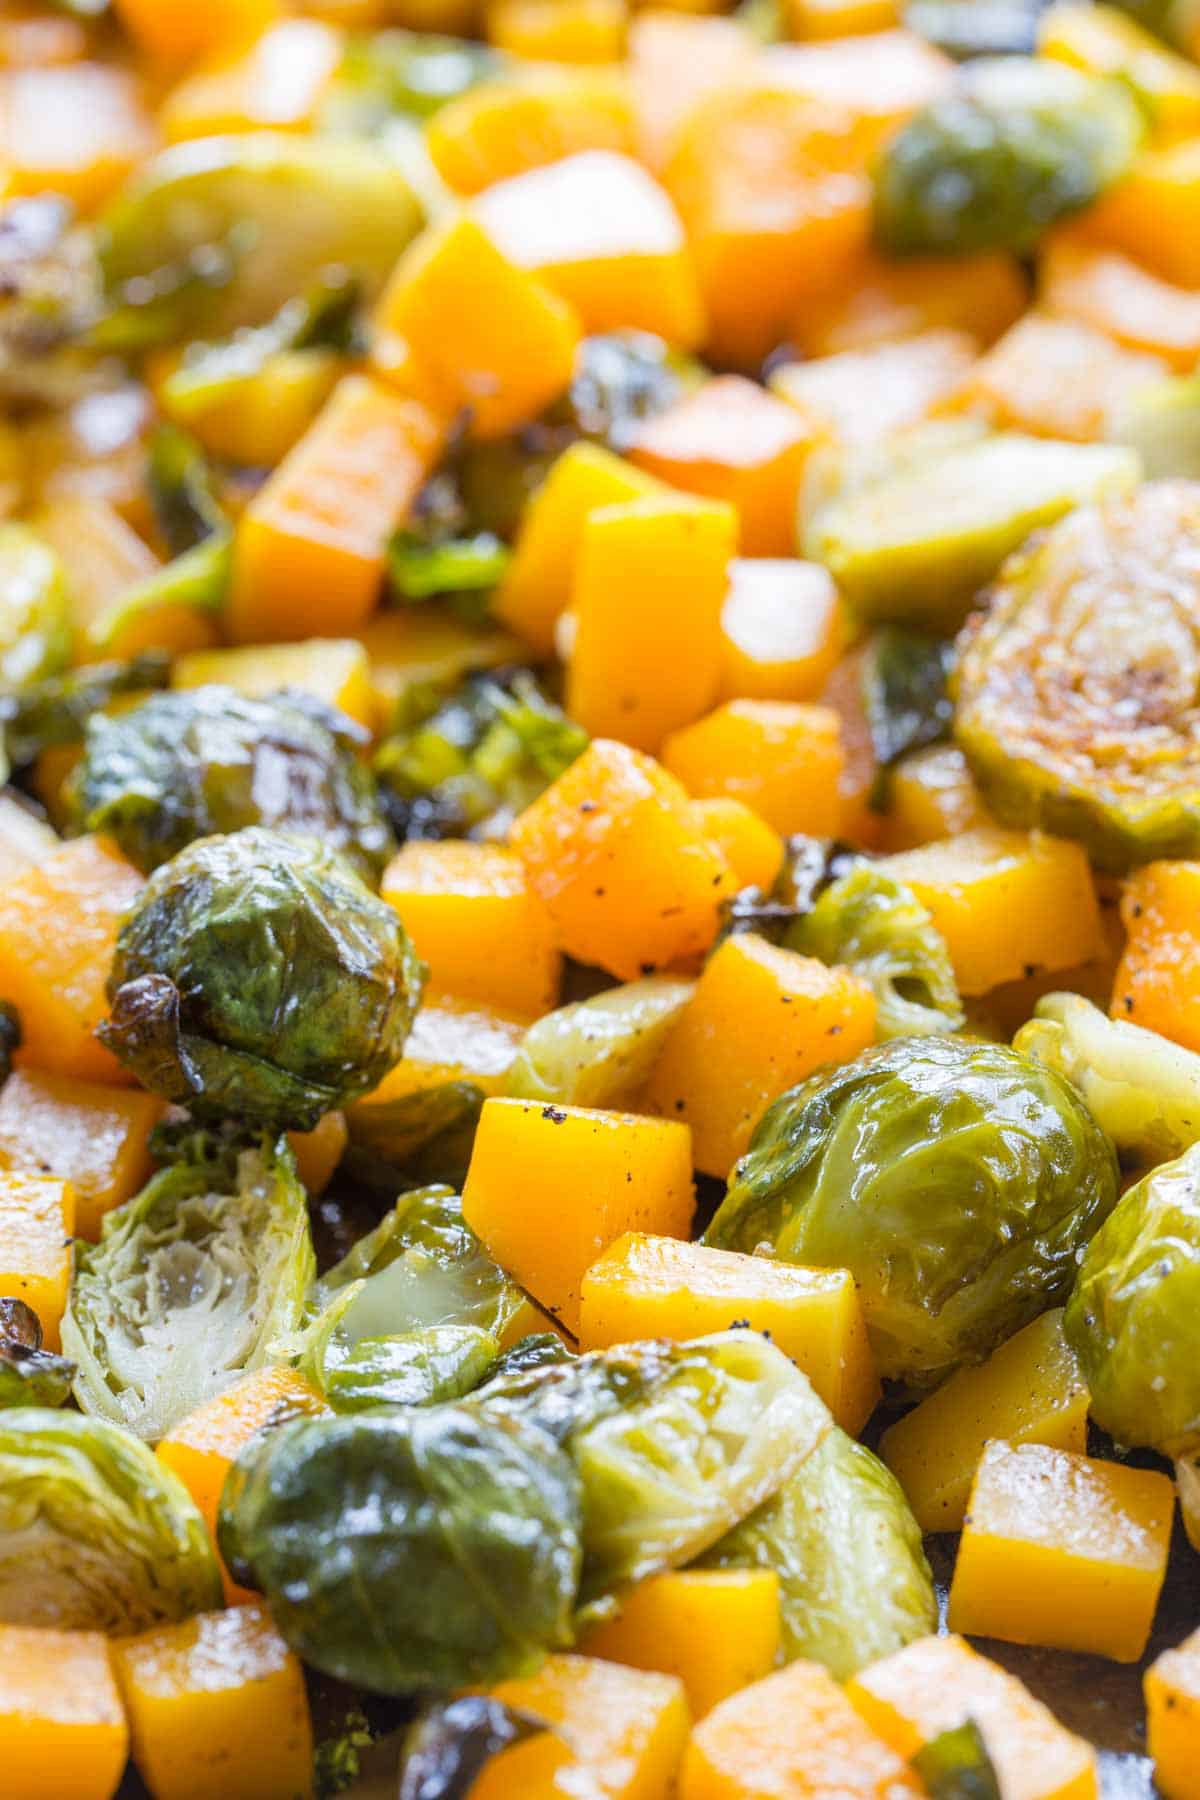 A mixture of squash cubed and Brussel sprouts roasted on a baking sheet.